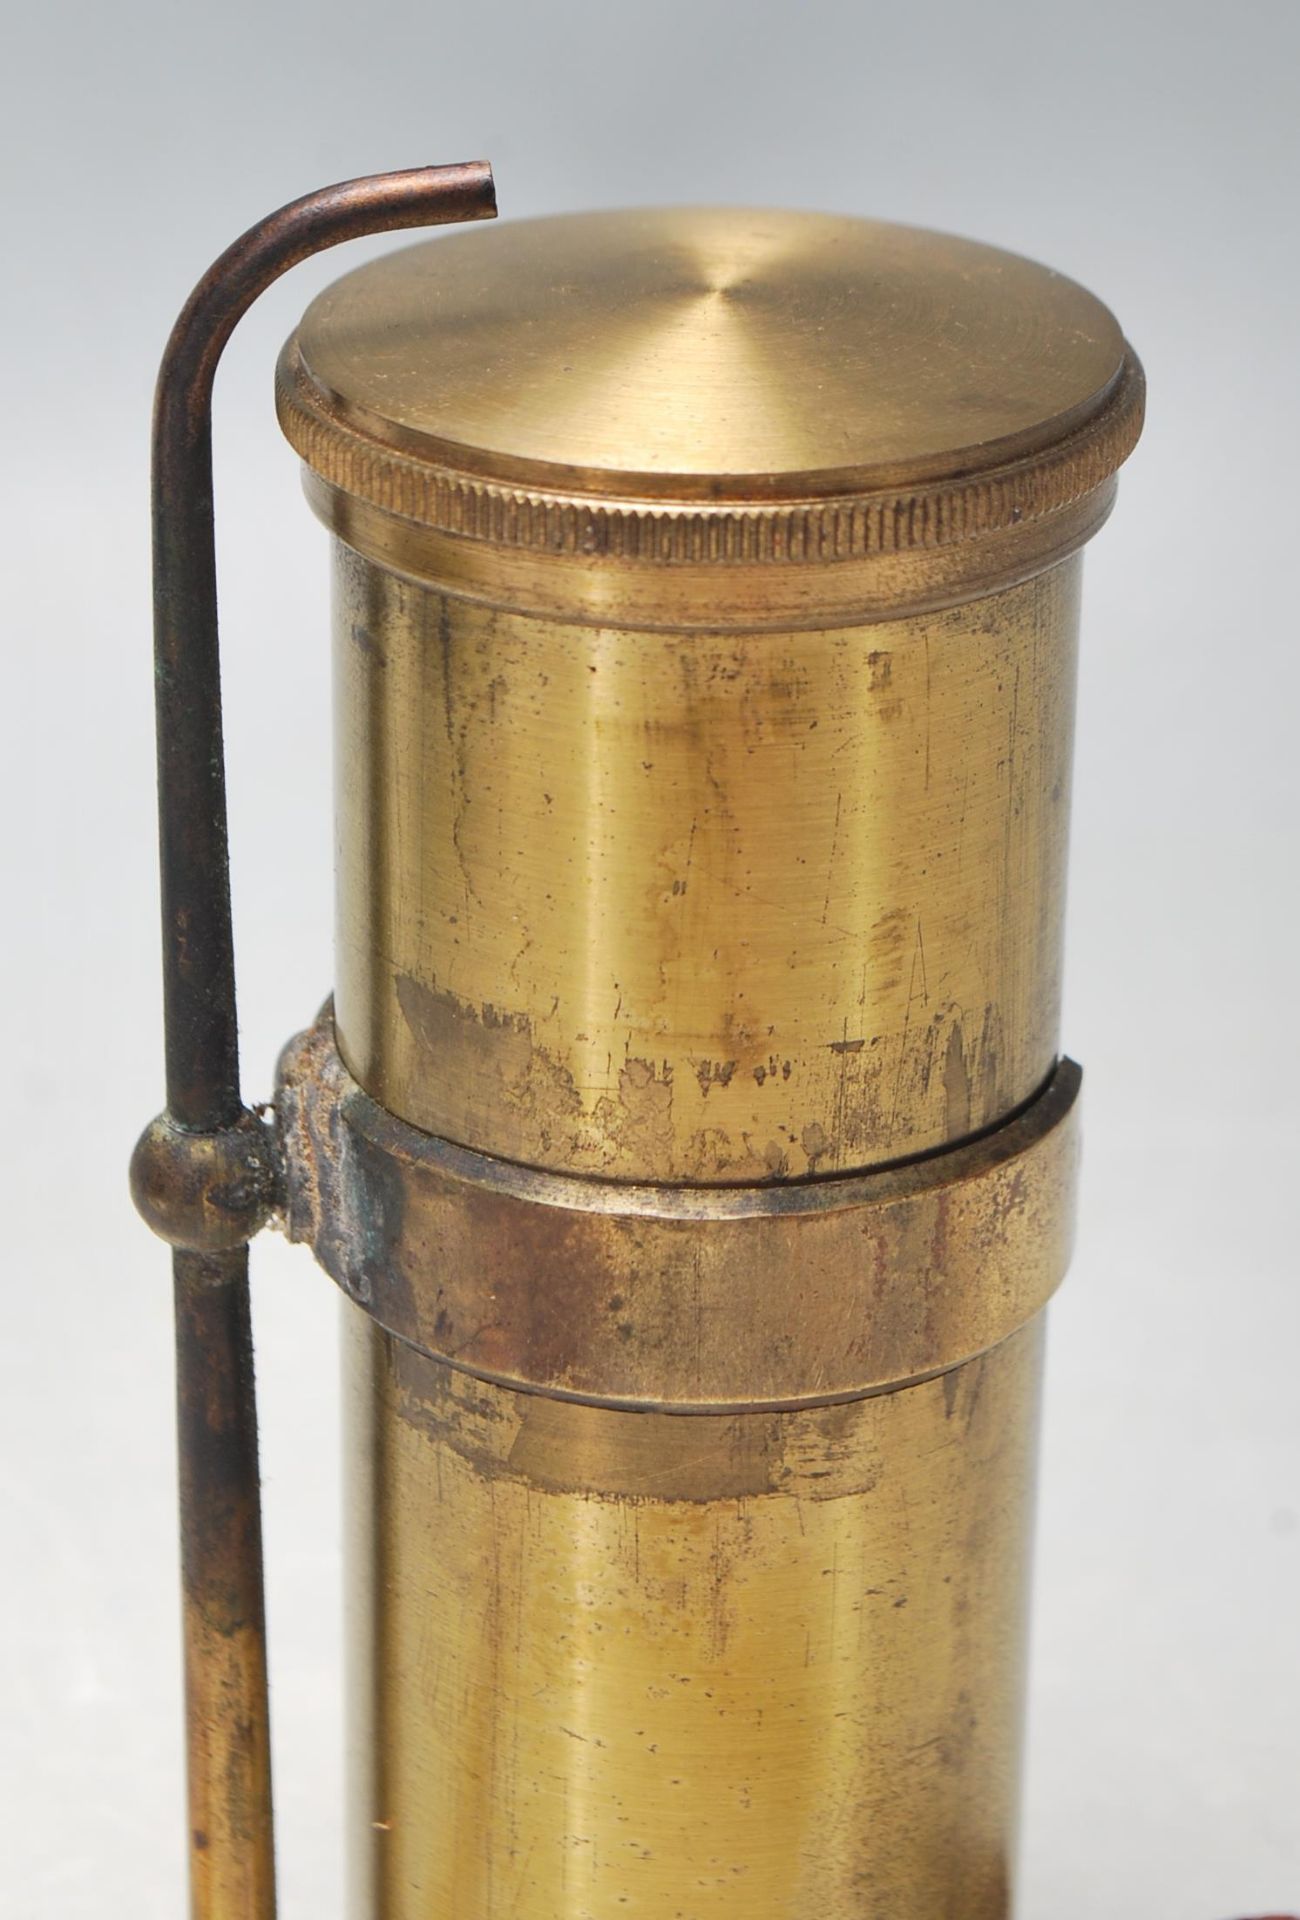 A VINTAGE 20TH CENTURY BRASS BLOW LAMP / JEWELLERY BLOW LAMP BY MOORE AND WRIGHT - Image 2 of 5